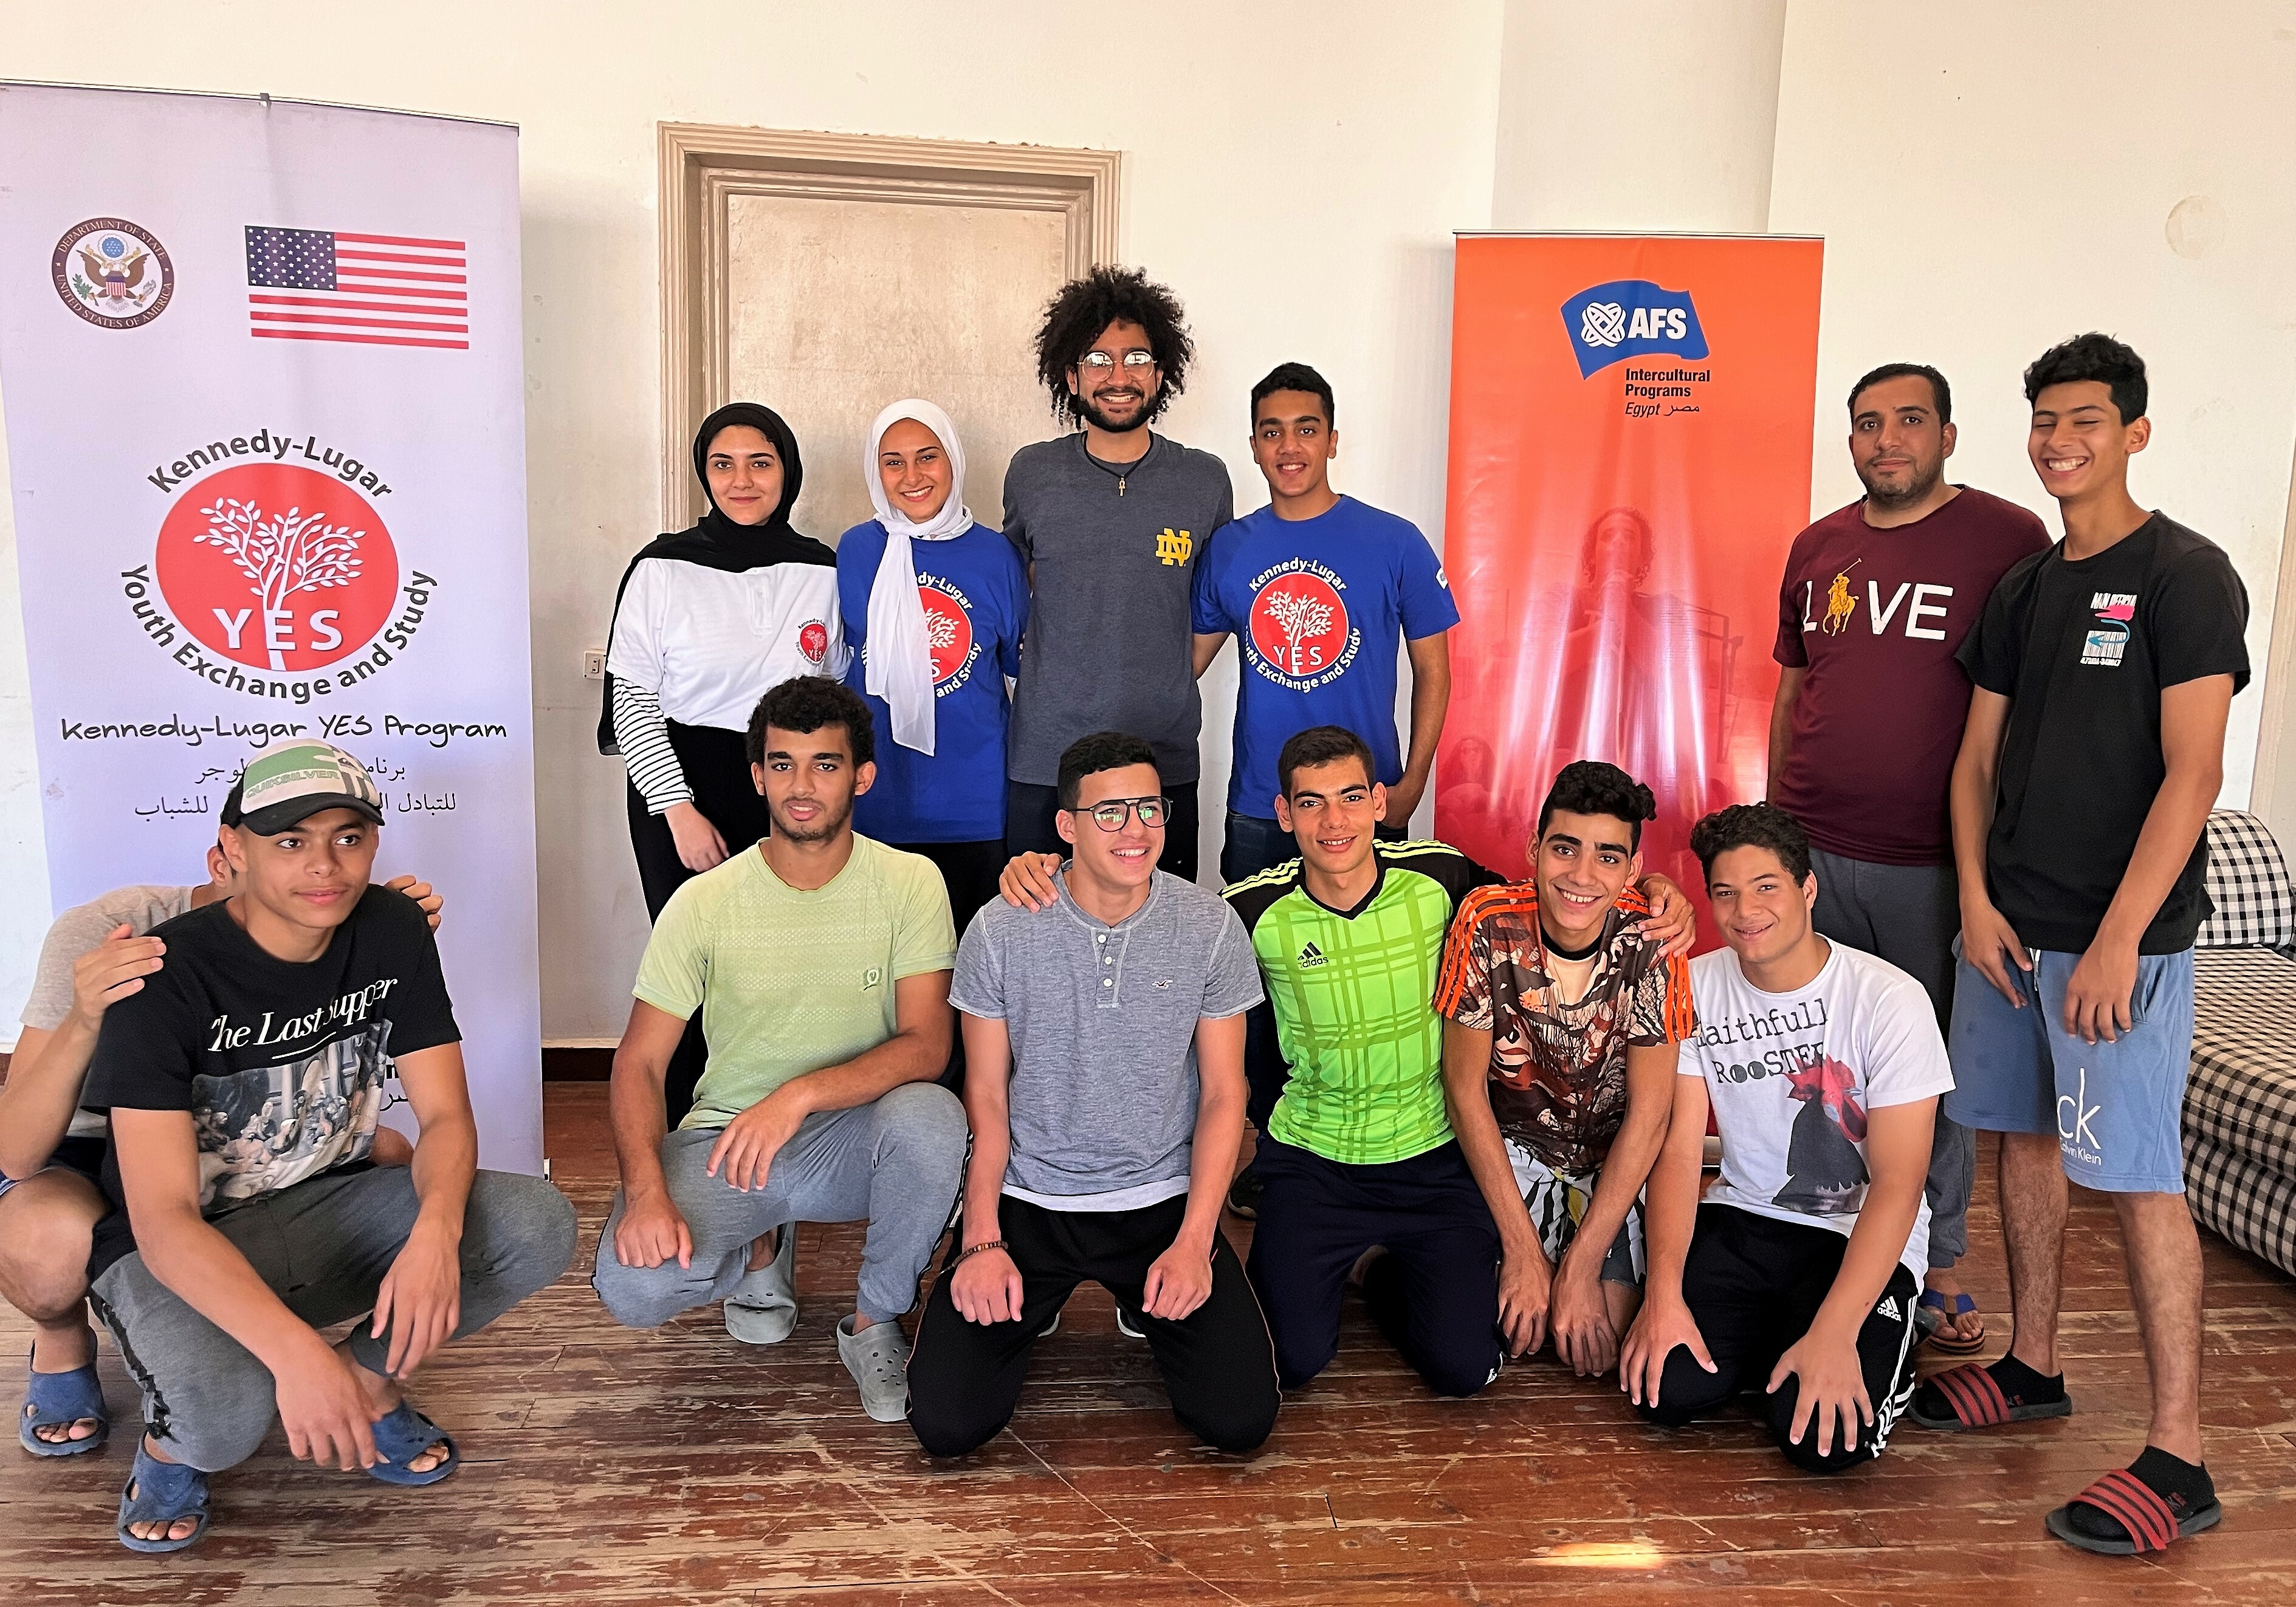 Thirteen People Pose For A Group Photo At A Workshop In Egypt